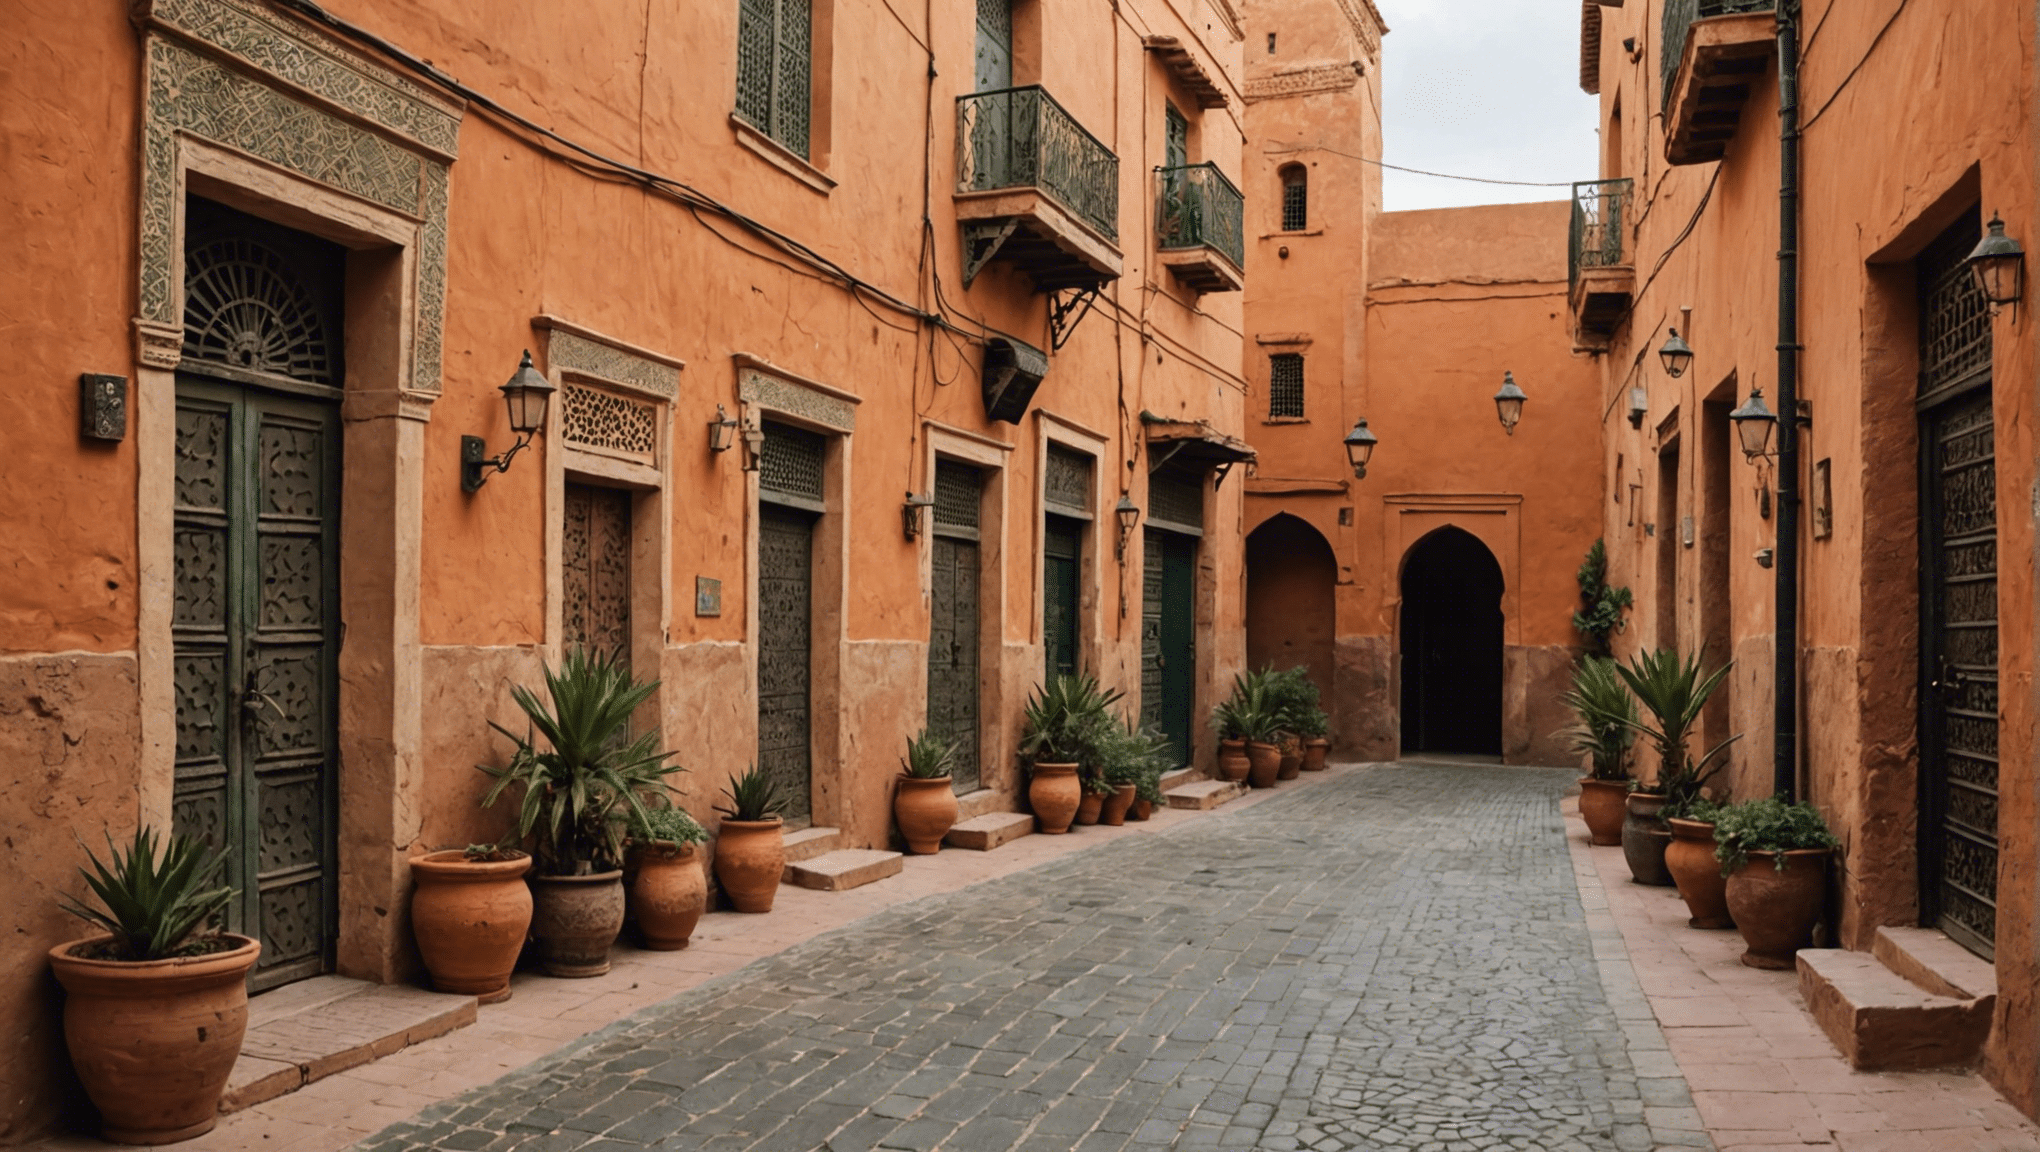 discover the weather conditions in morocco in october and plan your trip with confidence. get information on temperatures, rainfall, and more to make the most of your experience.